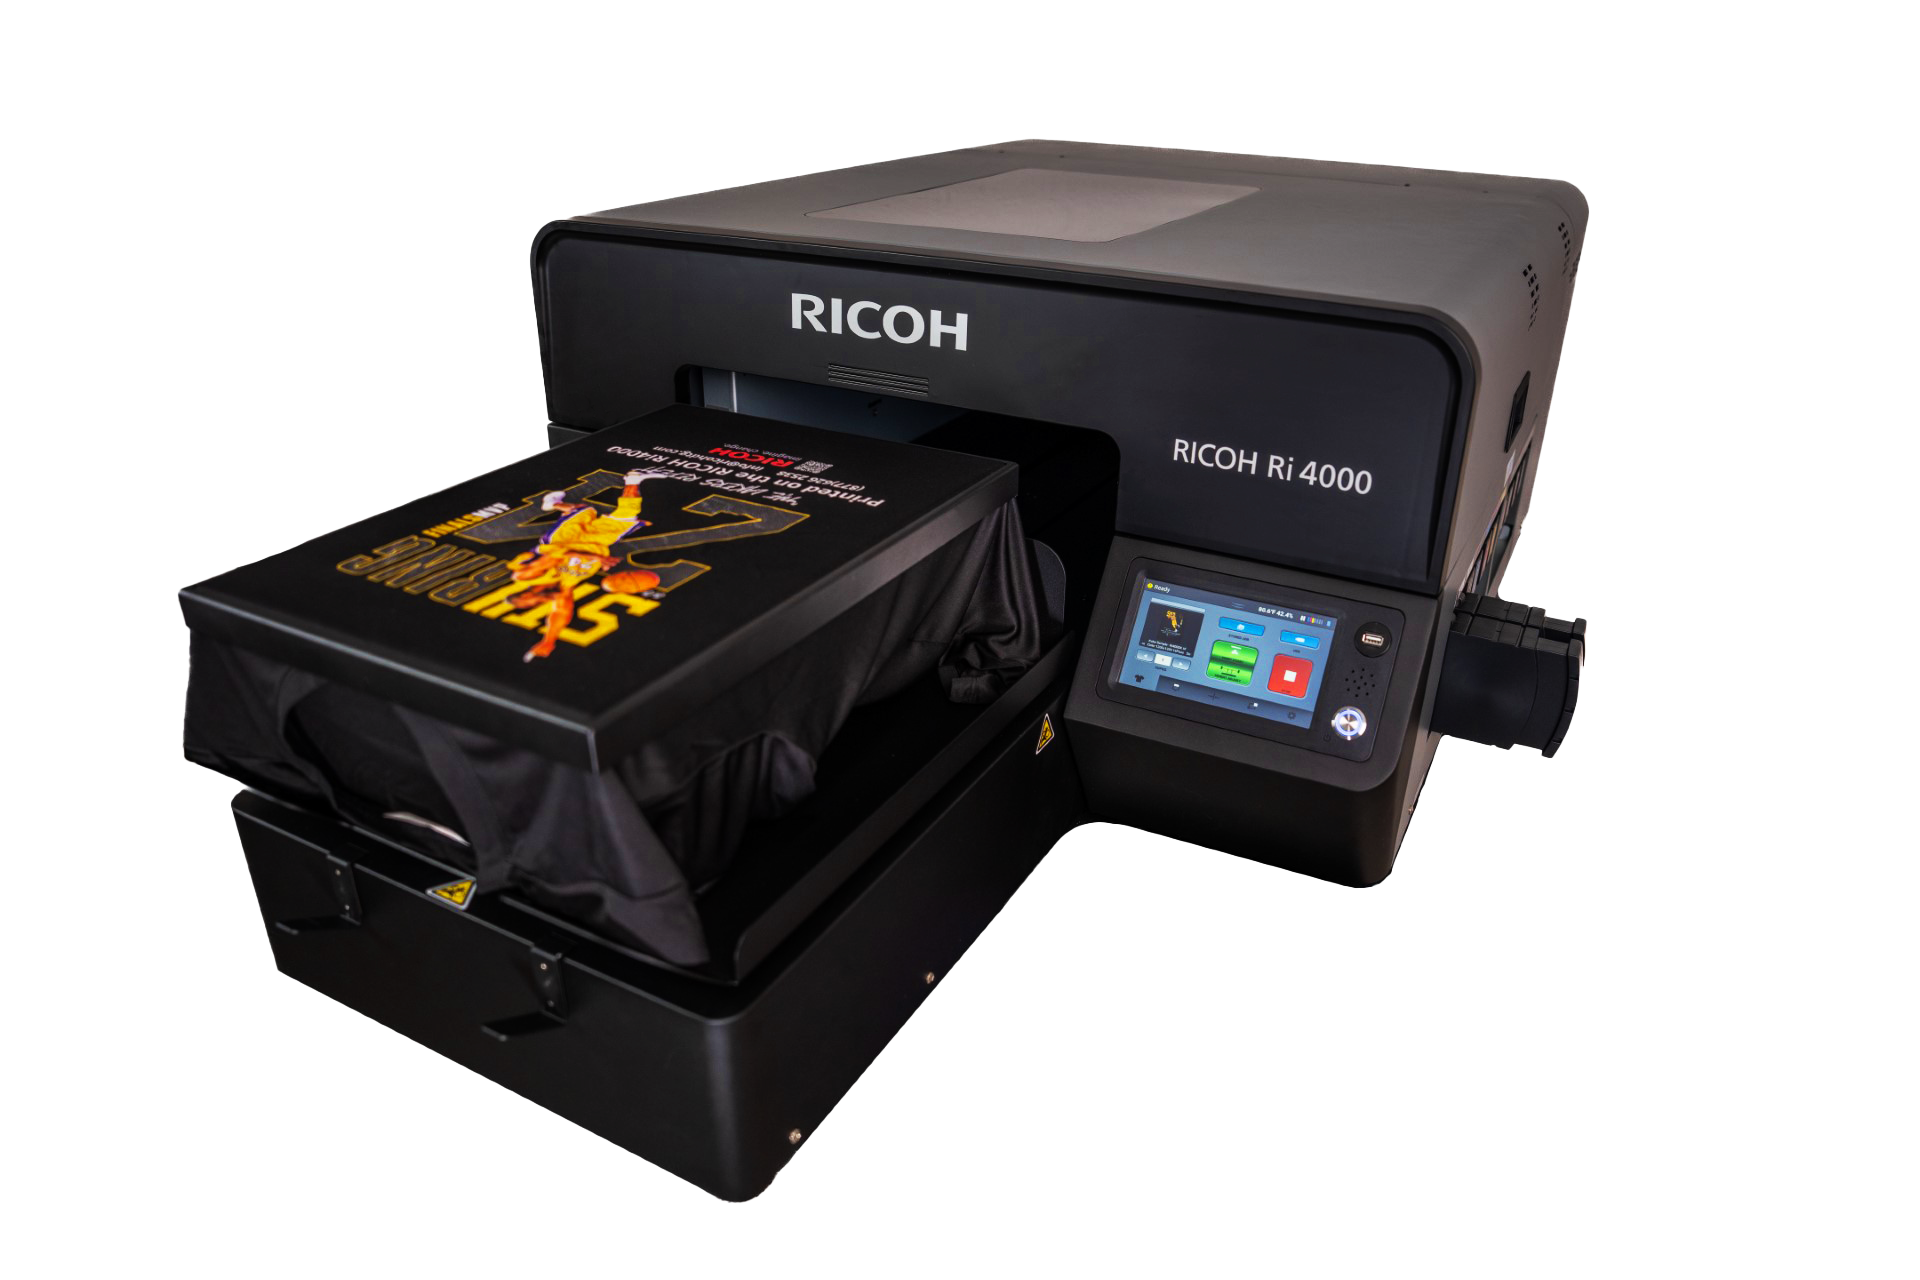 Polyester printing market gap closed by RICOH Ri 4000 Direct to Garment (DTG) printer